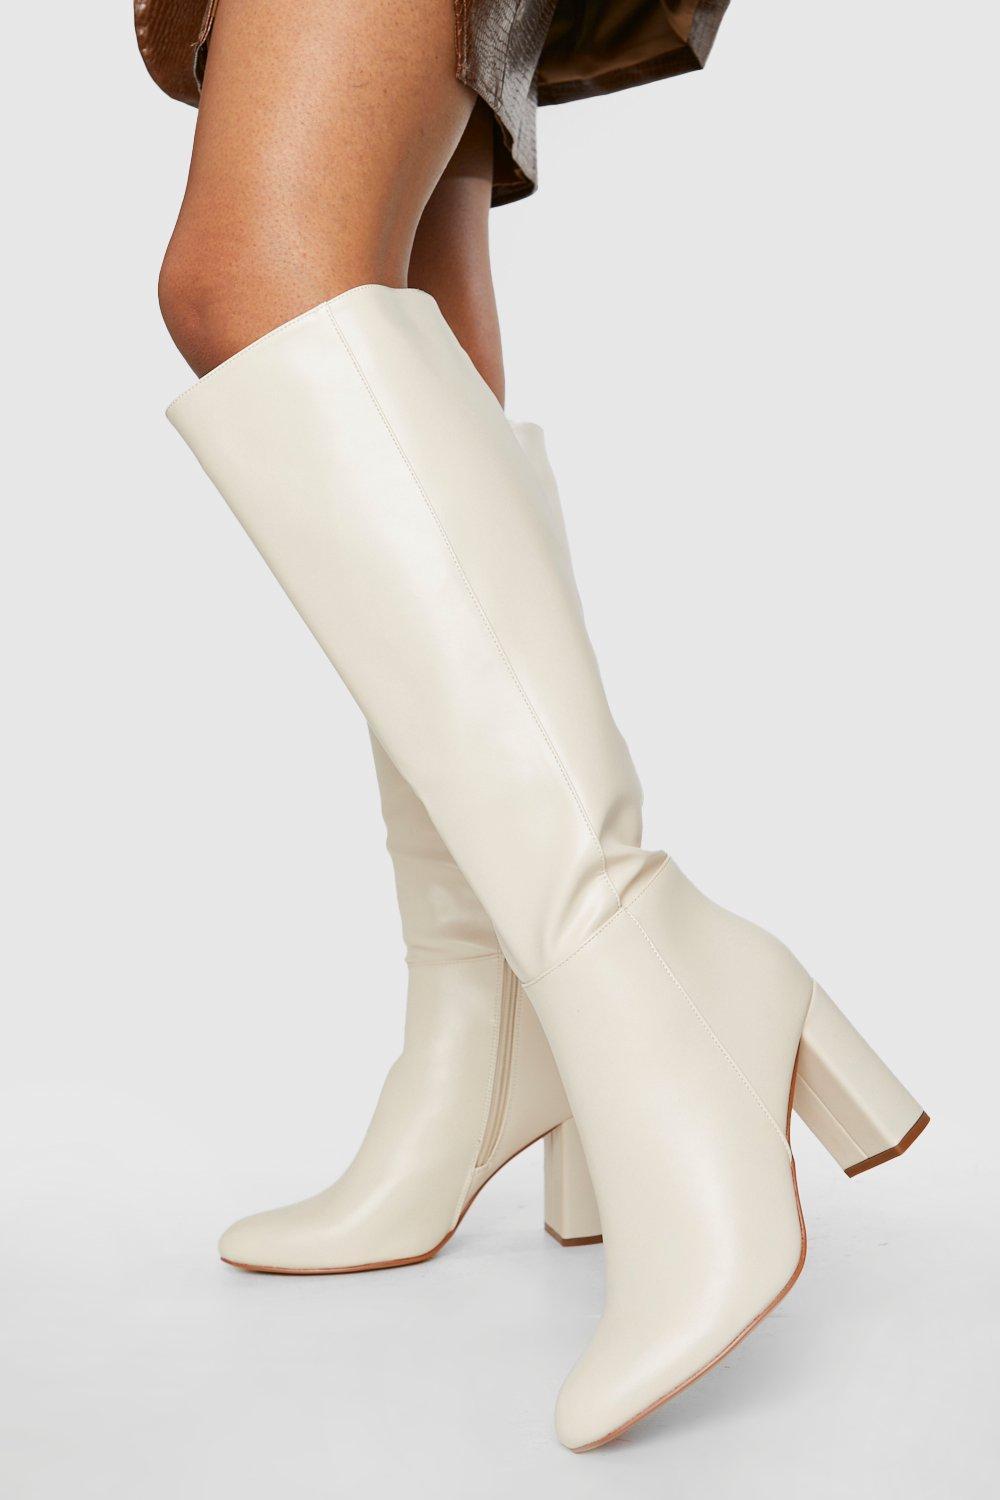 Boohoo Wide Width Block Heel Knee High Pull On Boots in Natural | Lyst